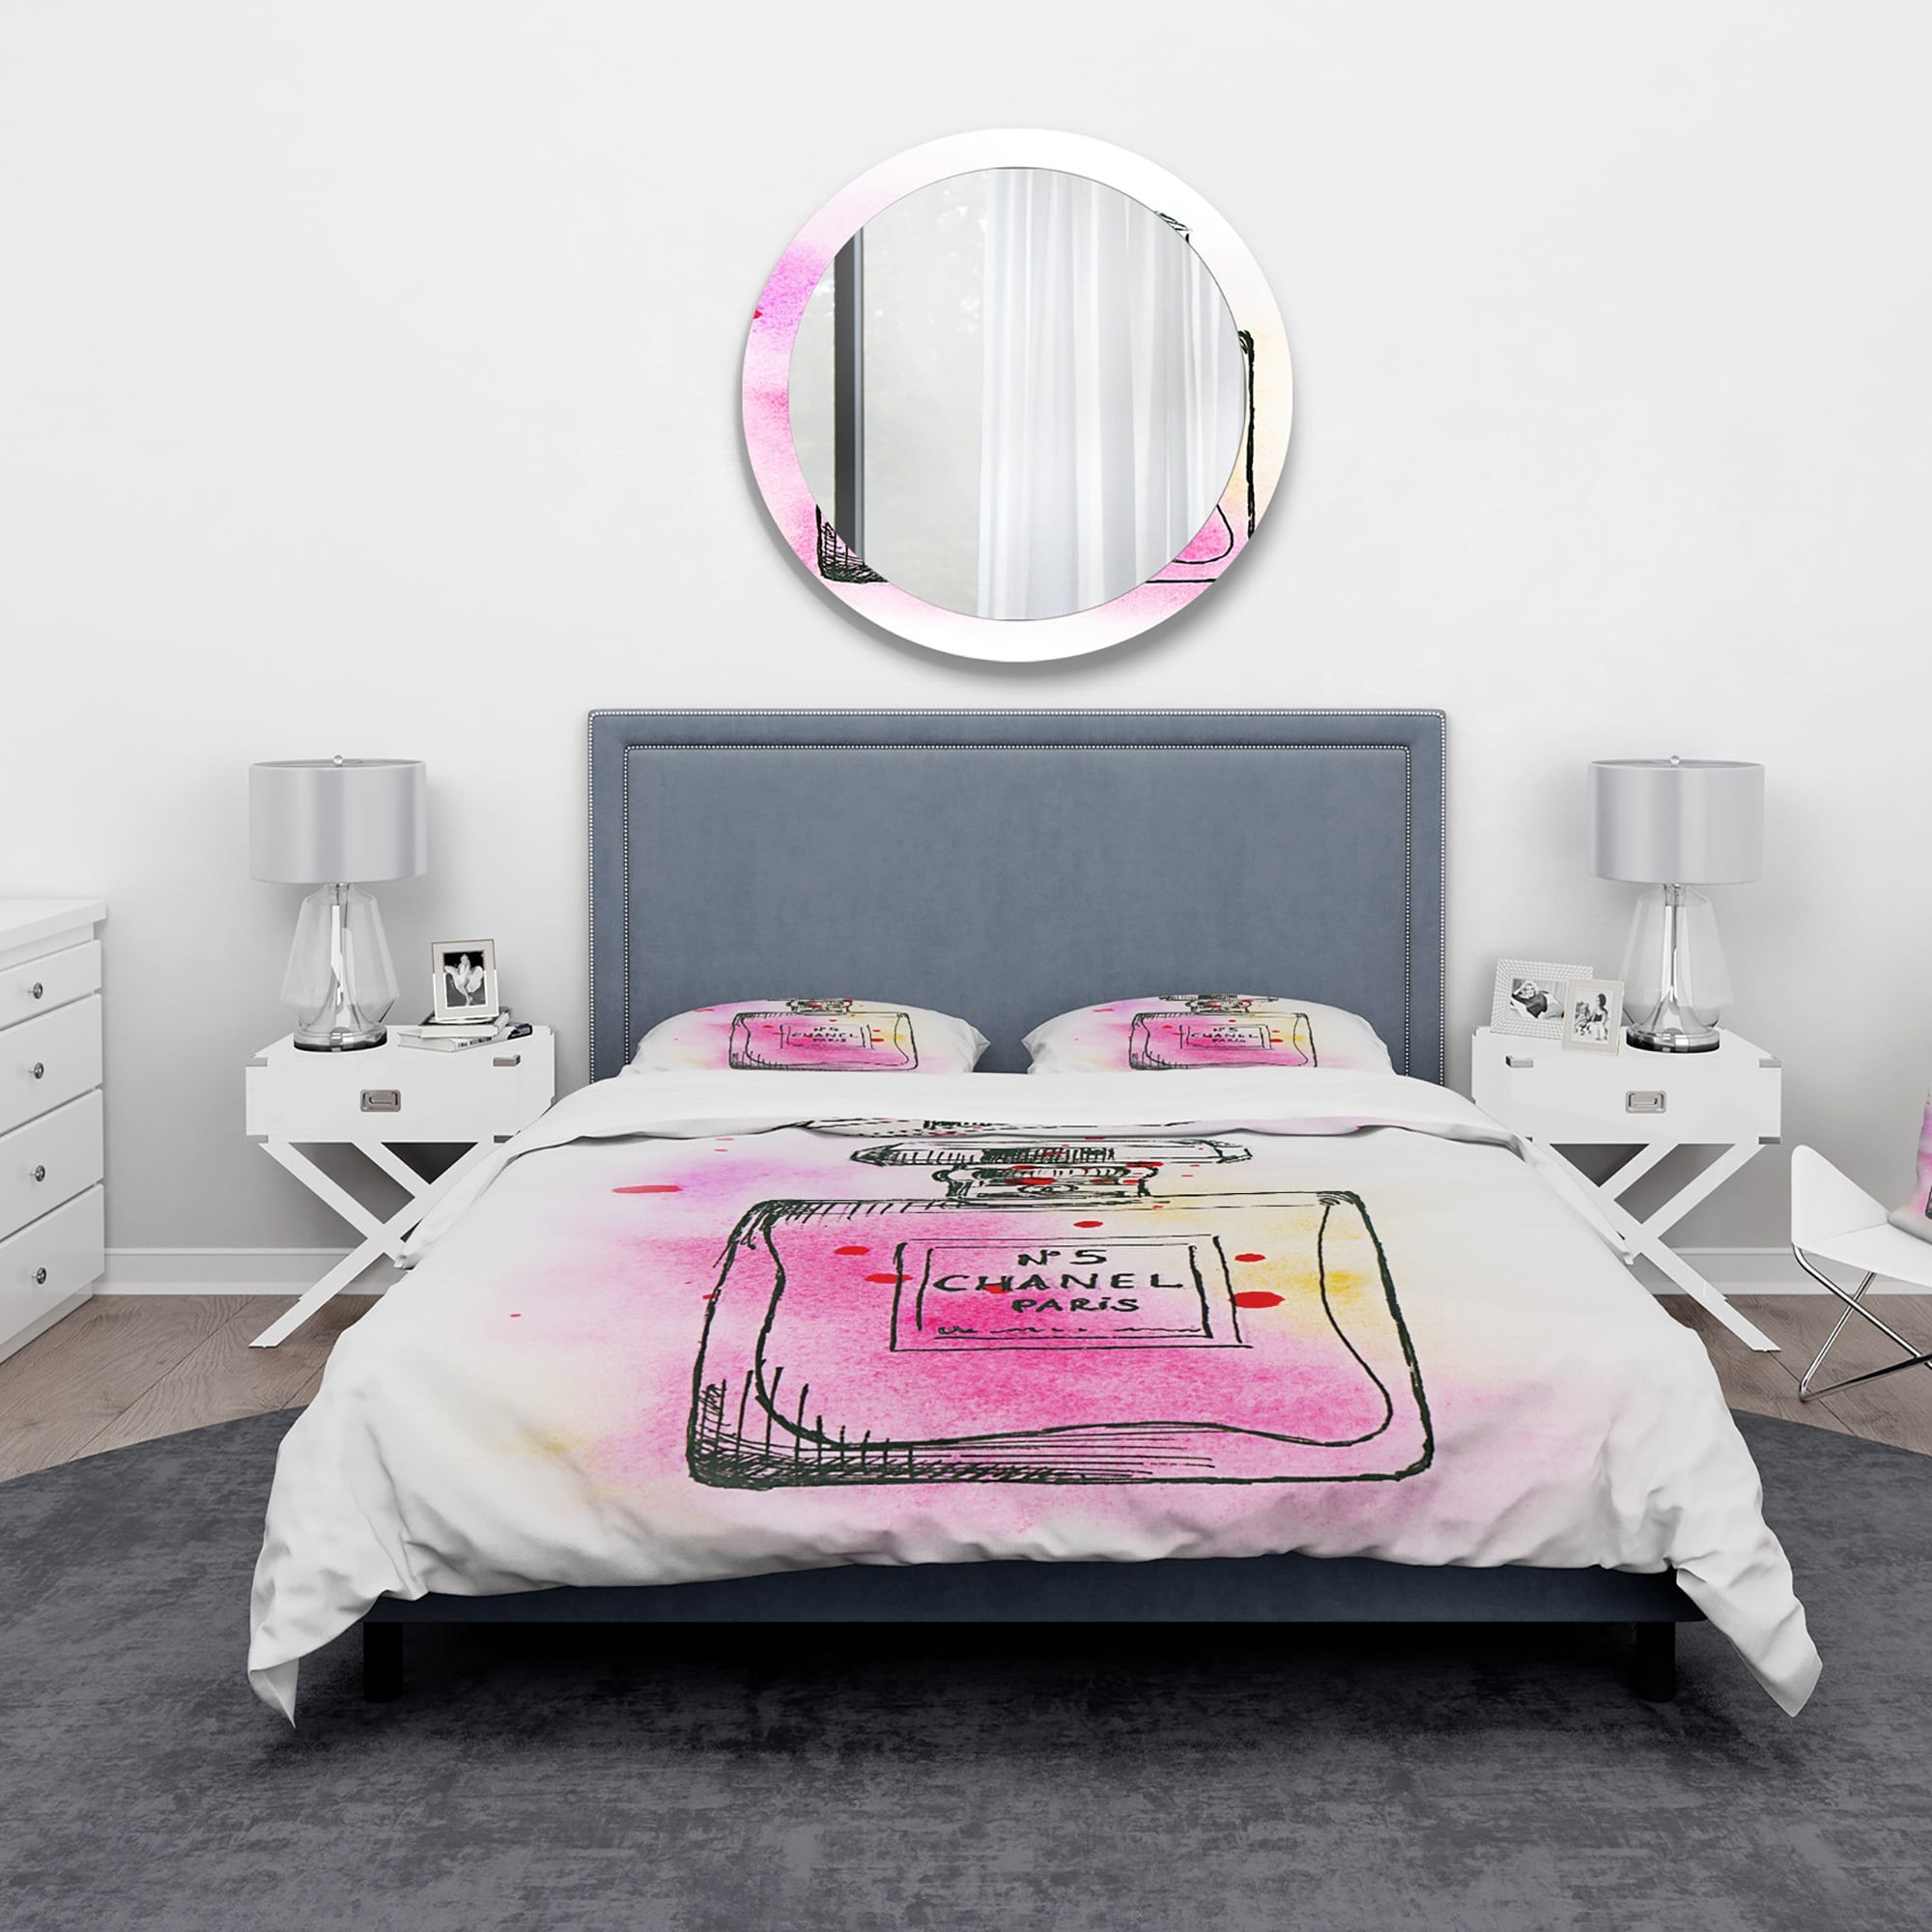 DESIGN ART Designart 'Perfume Chanel Five IV' French Country Duvet Cover  Set Full/Queen Cover + 2 Shams 3 Piece 